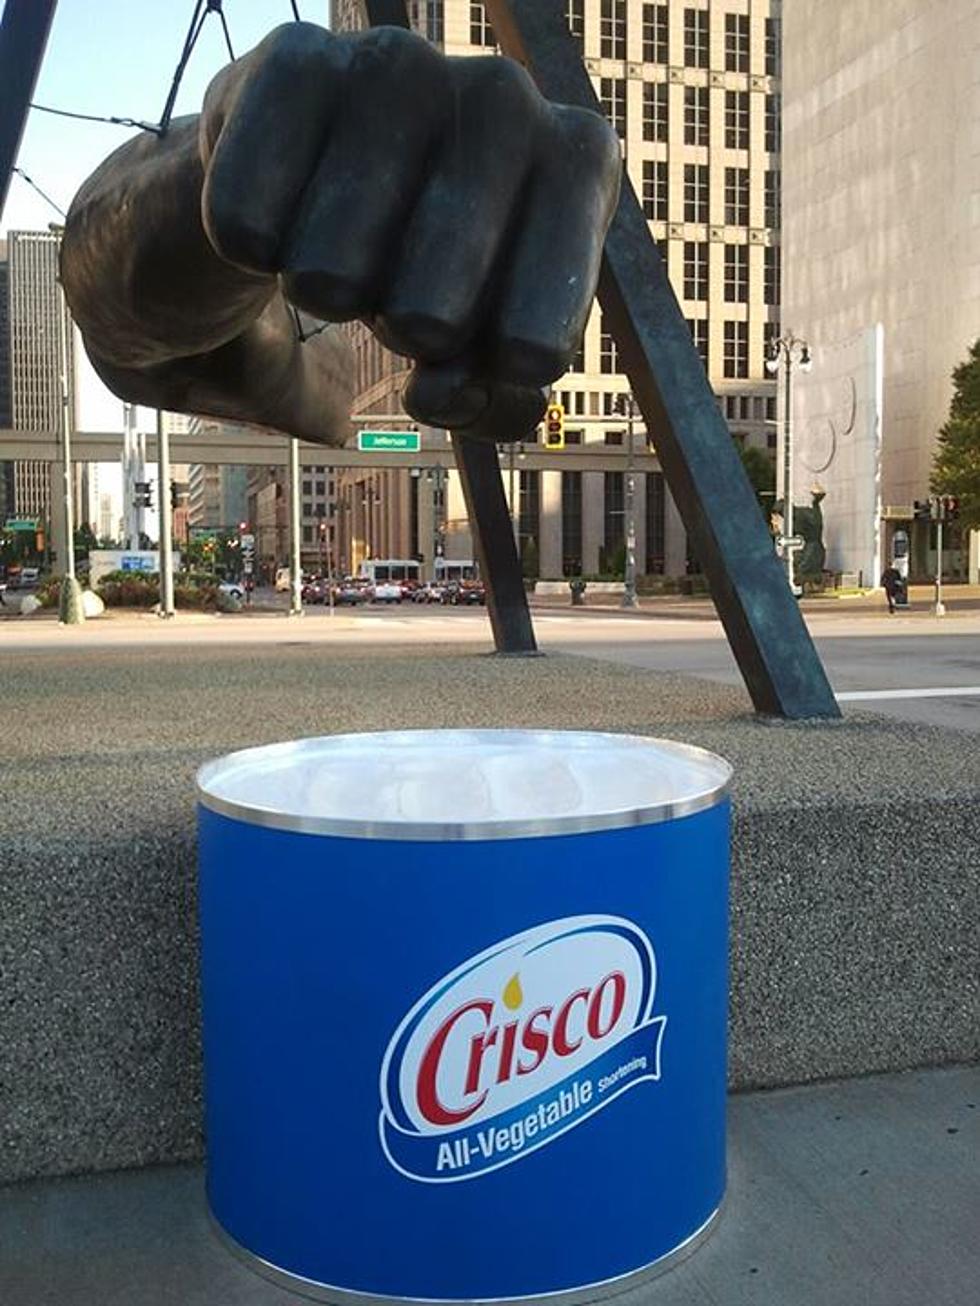 The City of Detroit Gets ‘Fisted’